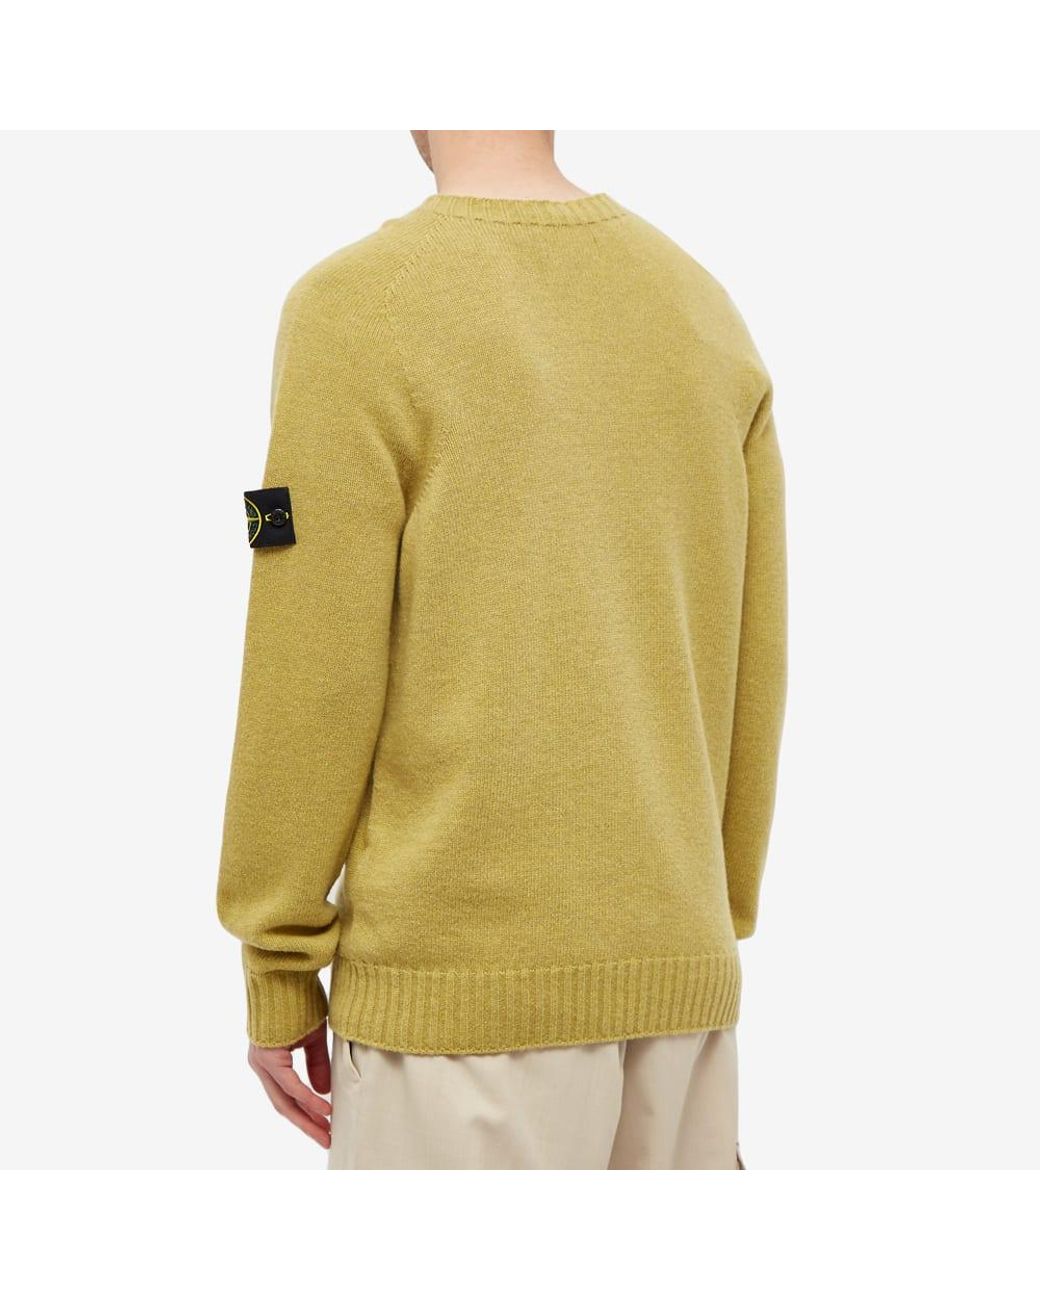 Stone Island Lambswool Crew Knit for Men | Lyst